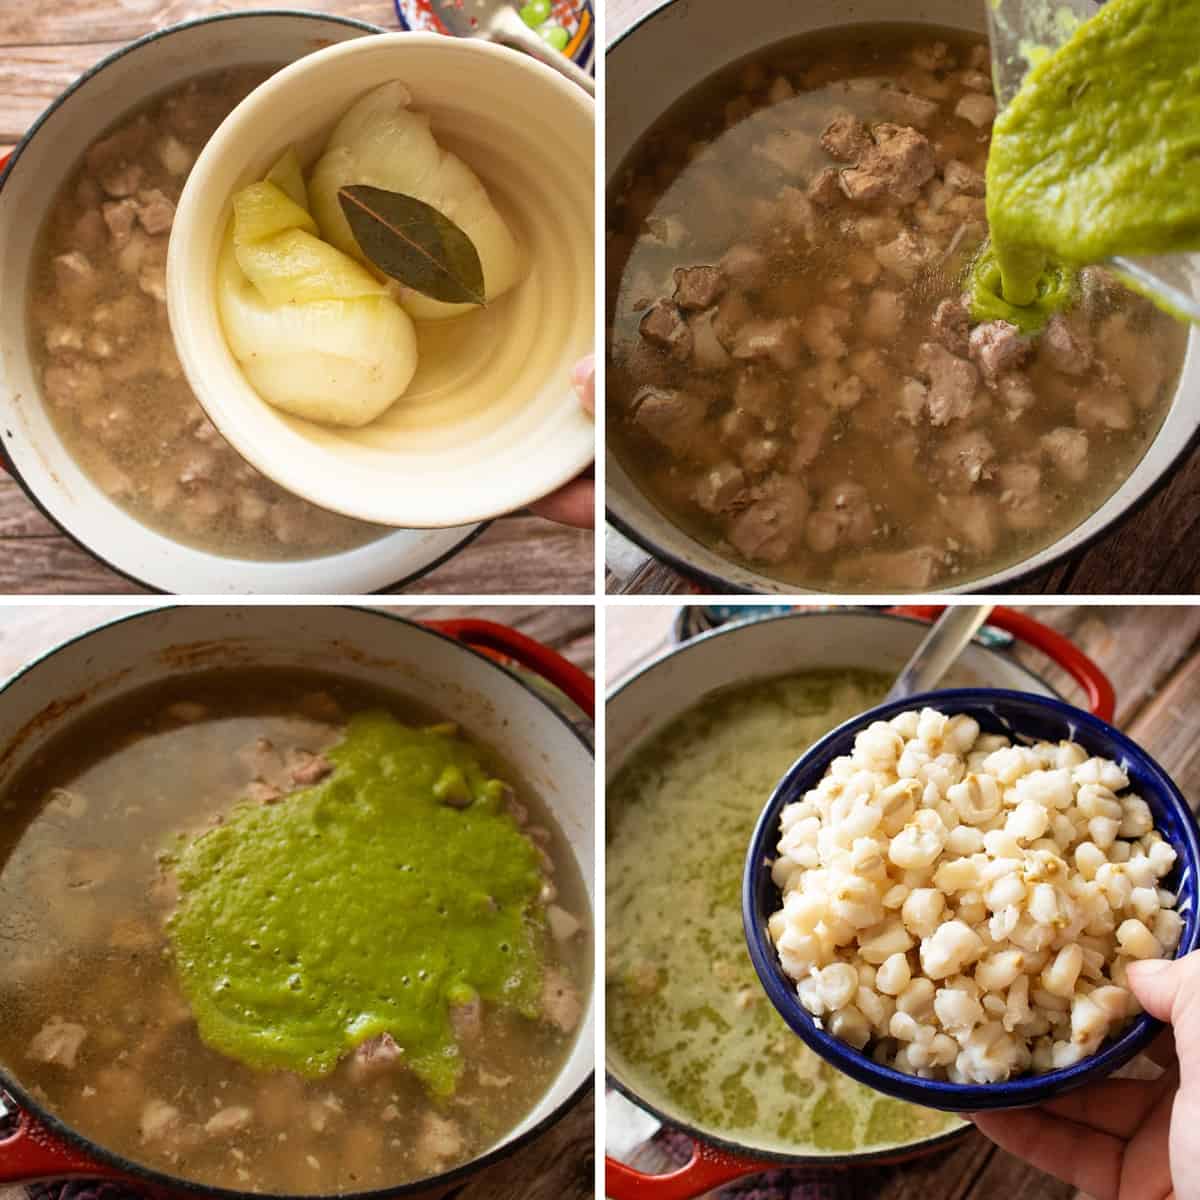 Adding the green tomatillo sauce and hominy to the stock pot.